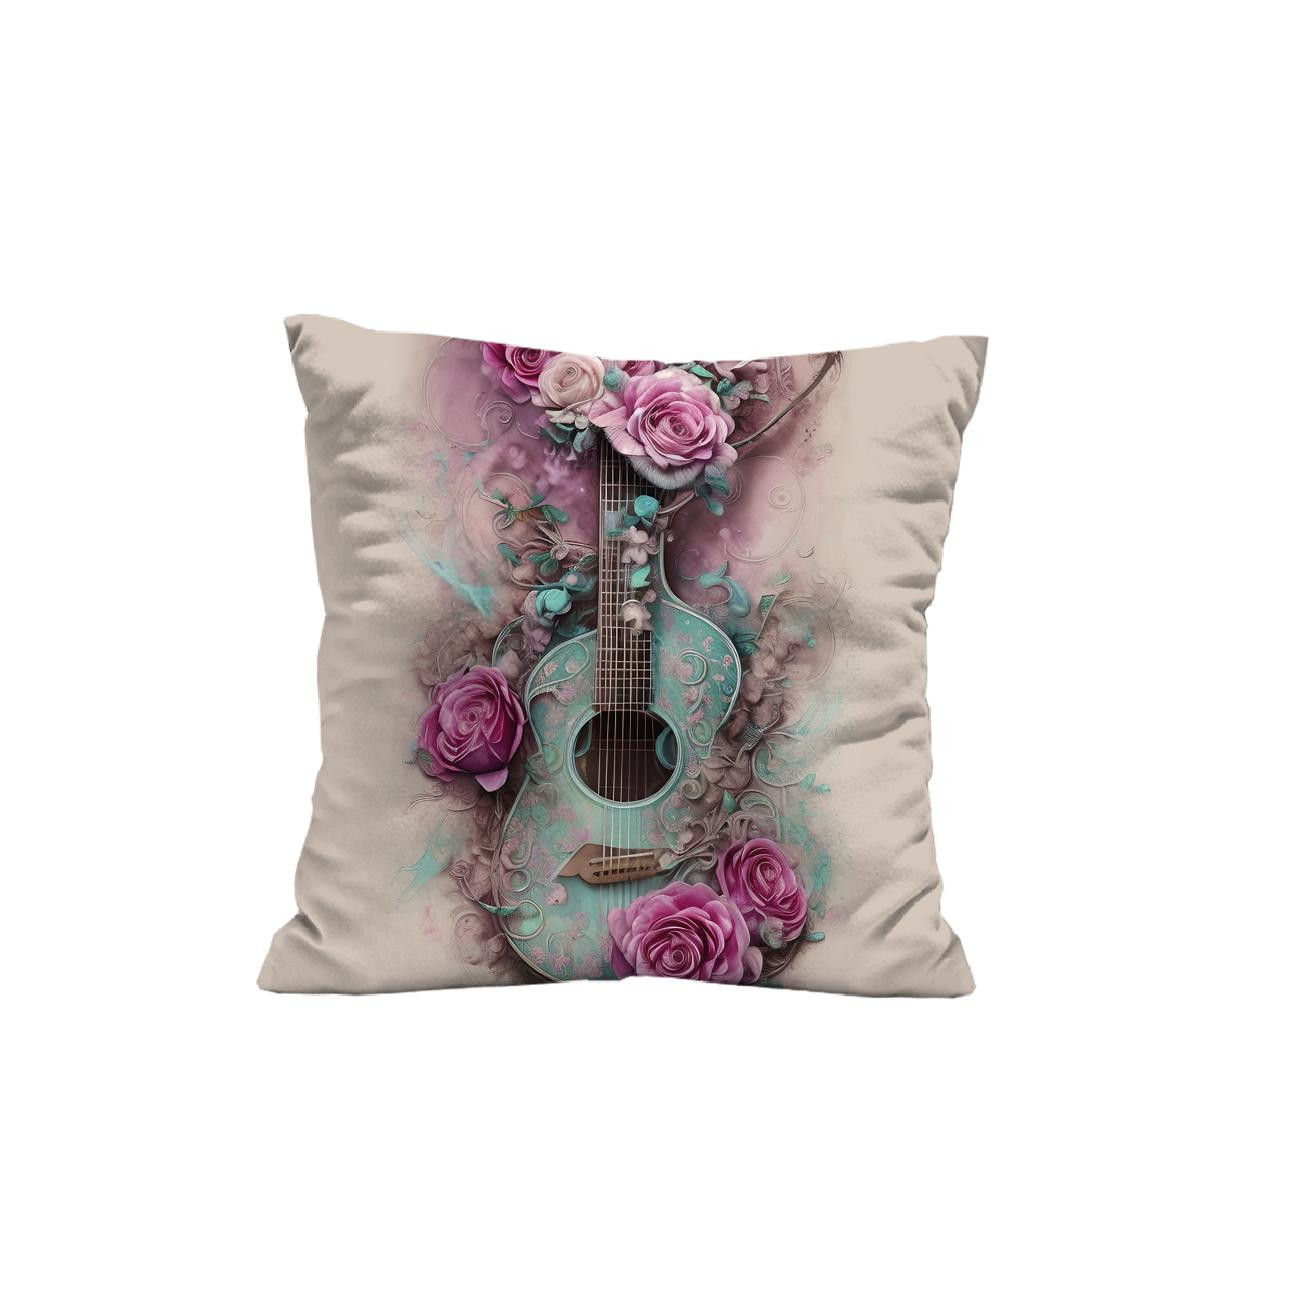 PILLOW 45X45 - GUITAR WITH ROSES - Cotton woven fabric - sewing set